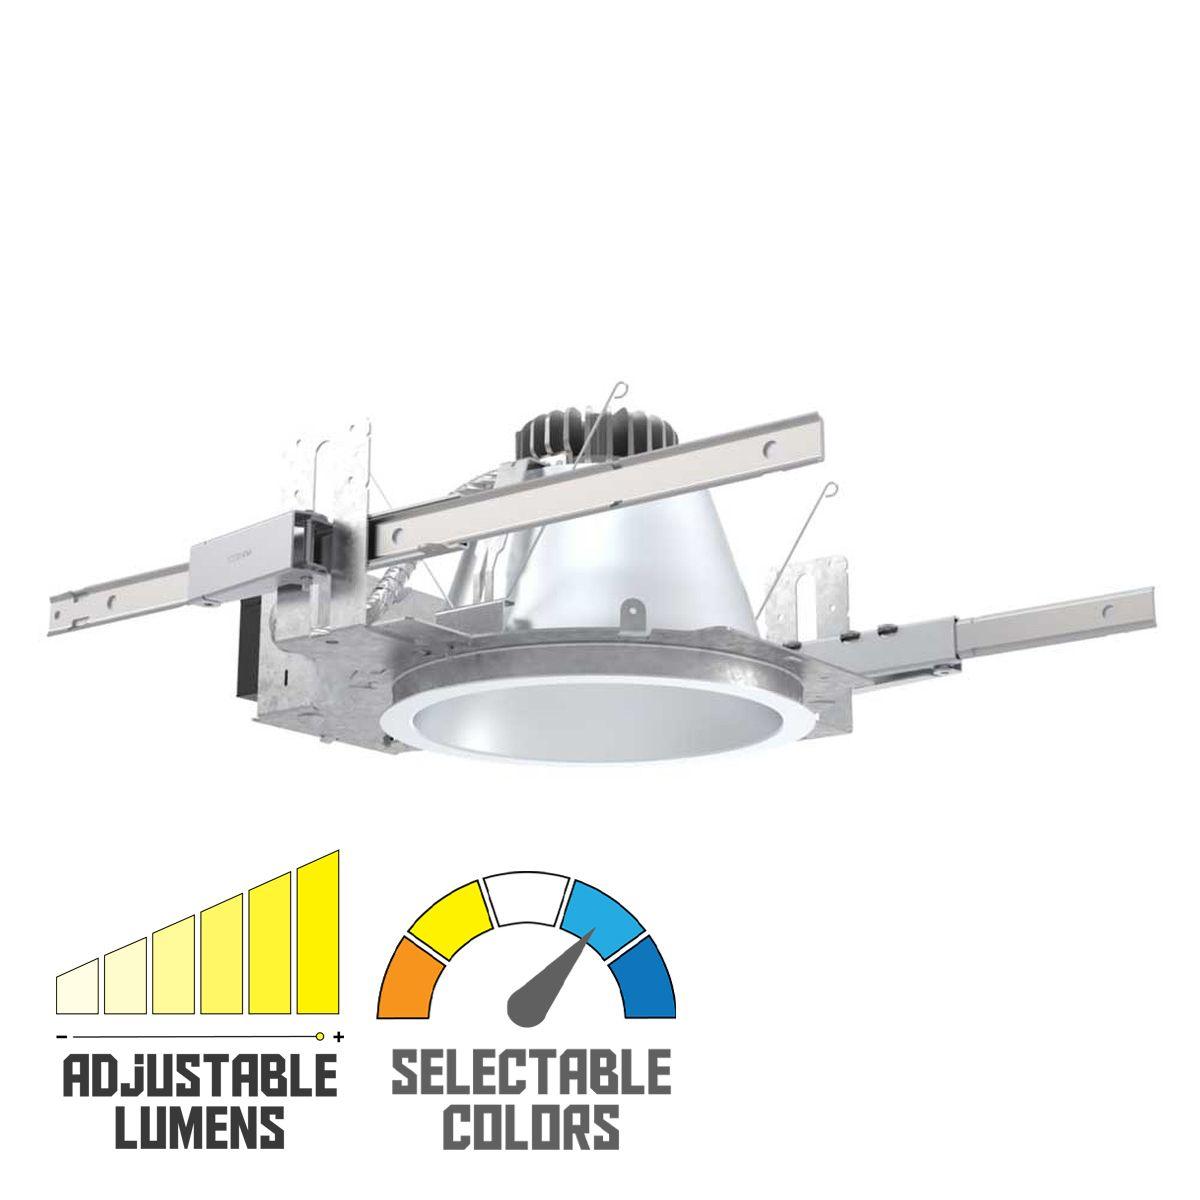 Lithonia LDN8 Commercial LED Recessed Downlight, 3800 Lumens Adjustable, Selectable CCT, 30K/35K/40K/50K, Battery Backup Included (Reflector Sold Separately)